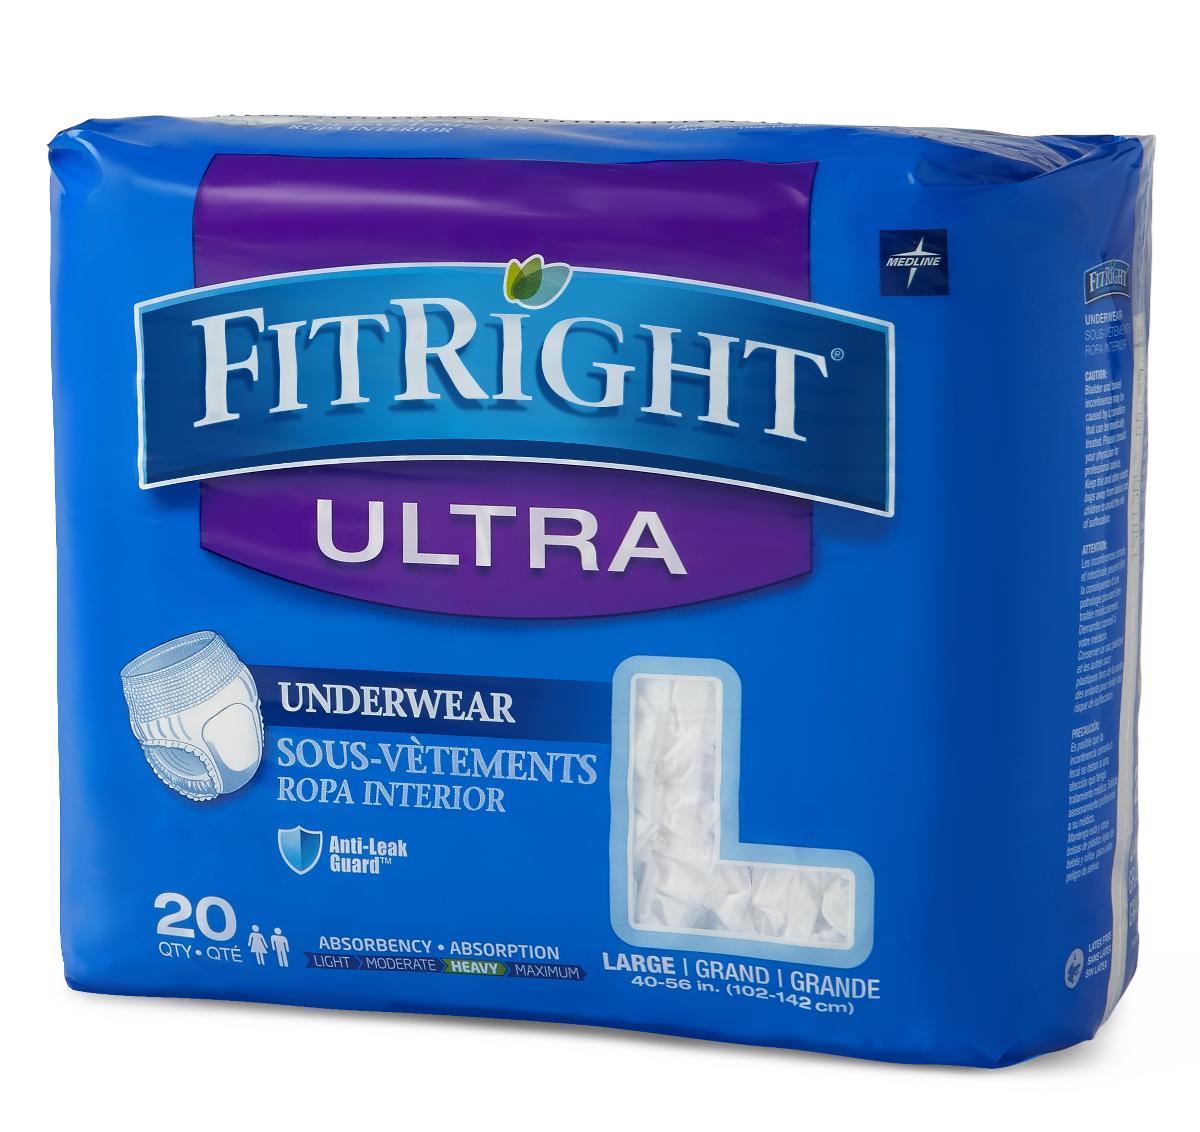 FitRight Ultra Protective Underwear Large